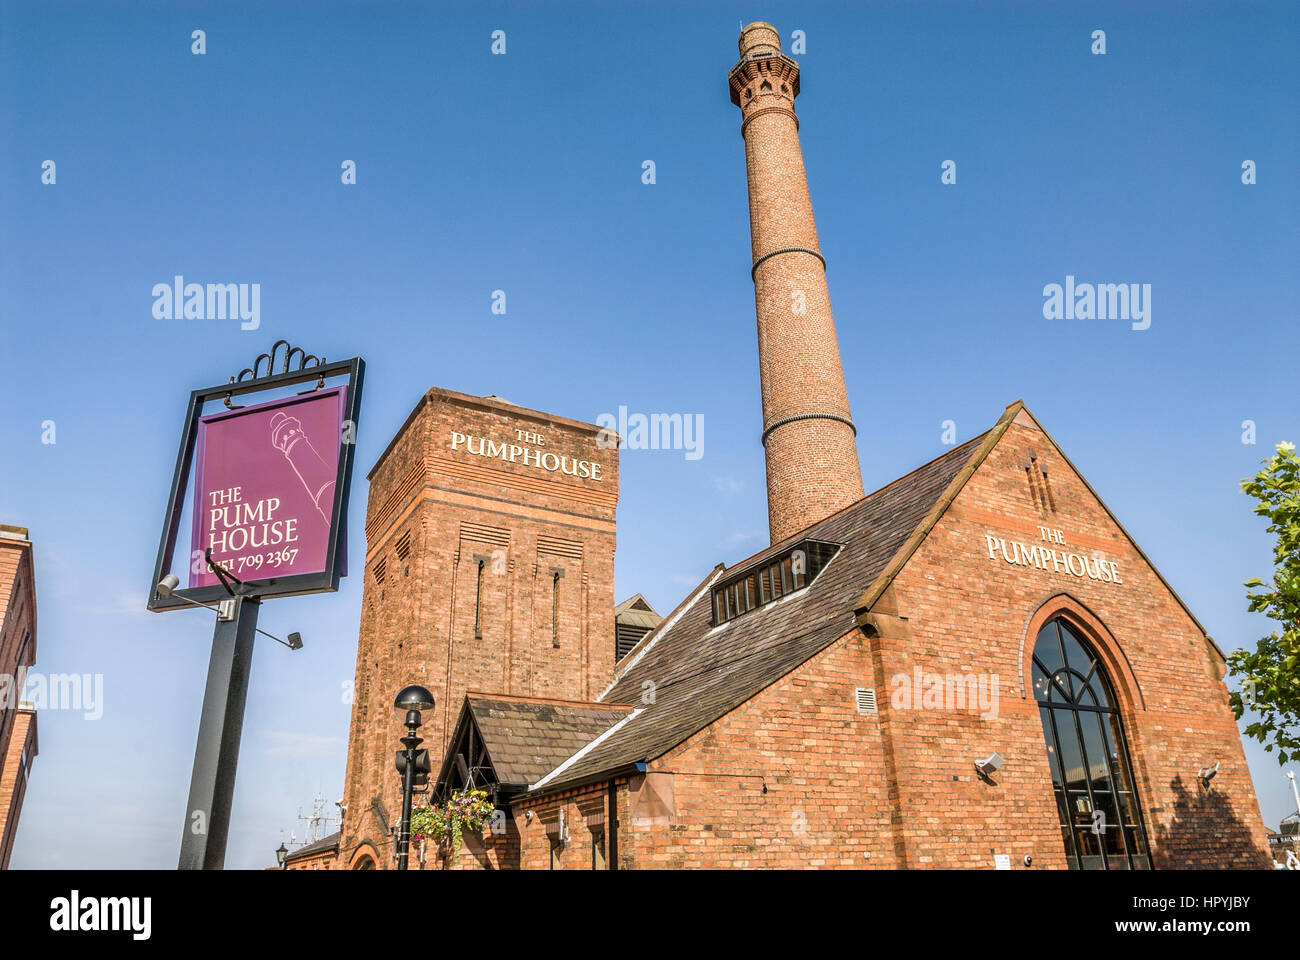 The Pumphouse at the Albert Dock, a complex of dock buildings and warehouses in Liverpool, England. Designed by Jesse Hartley and Philip Hardwick, it  Stock Photo